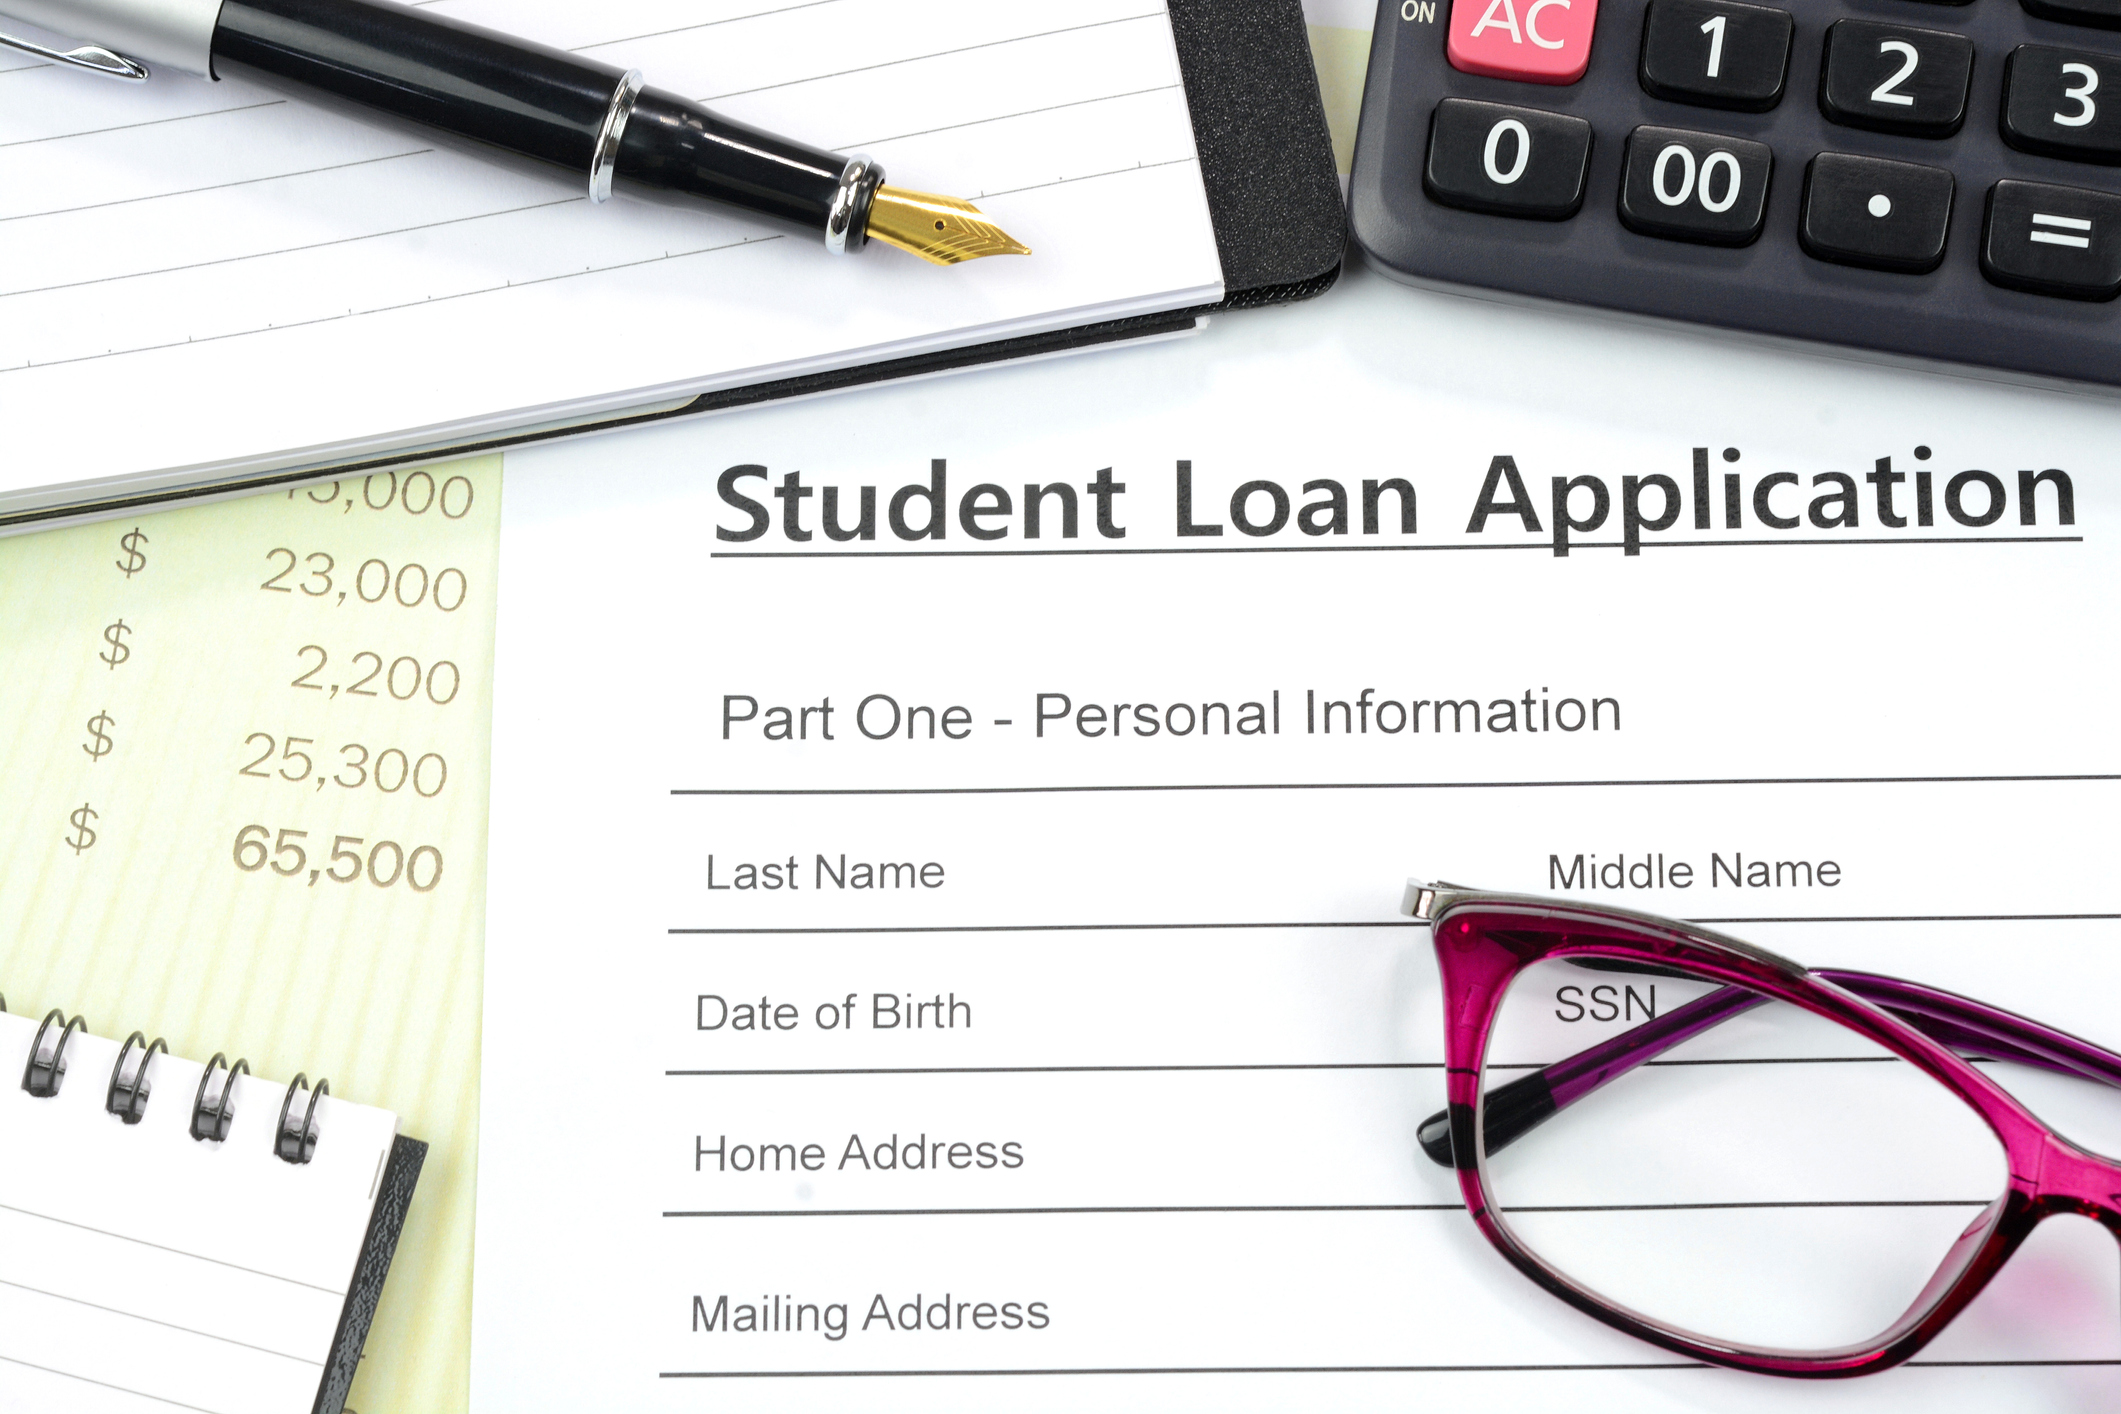 Does refinancing your student loans hurt your credit